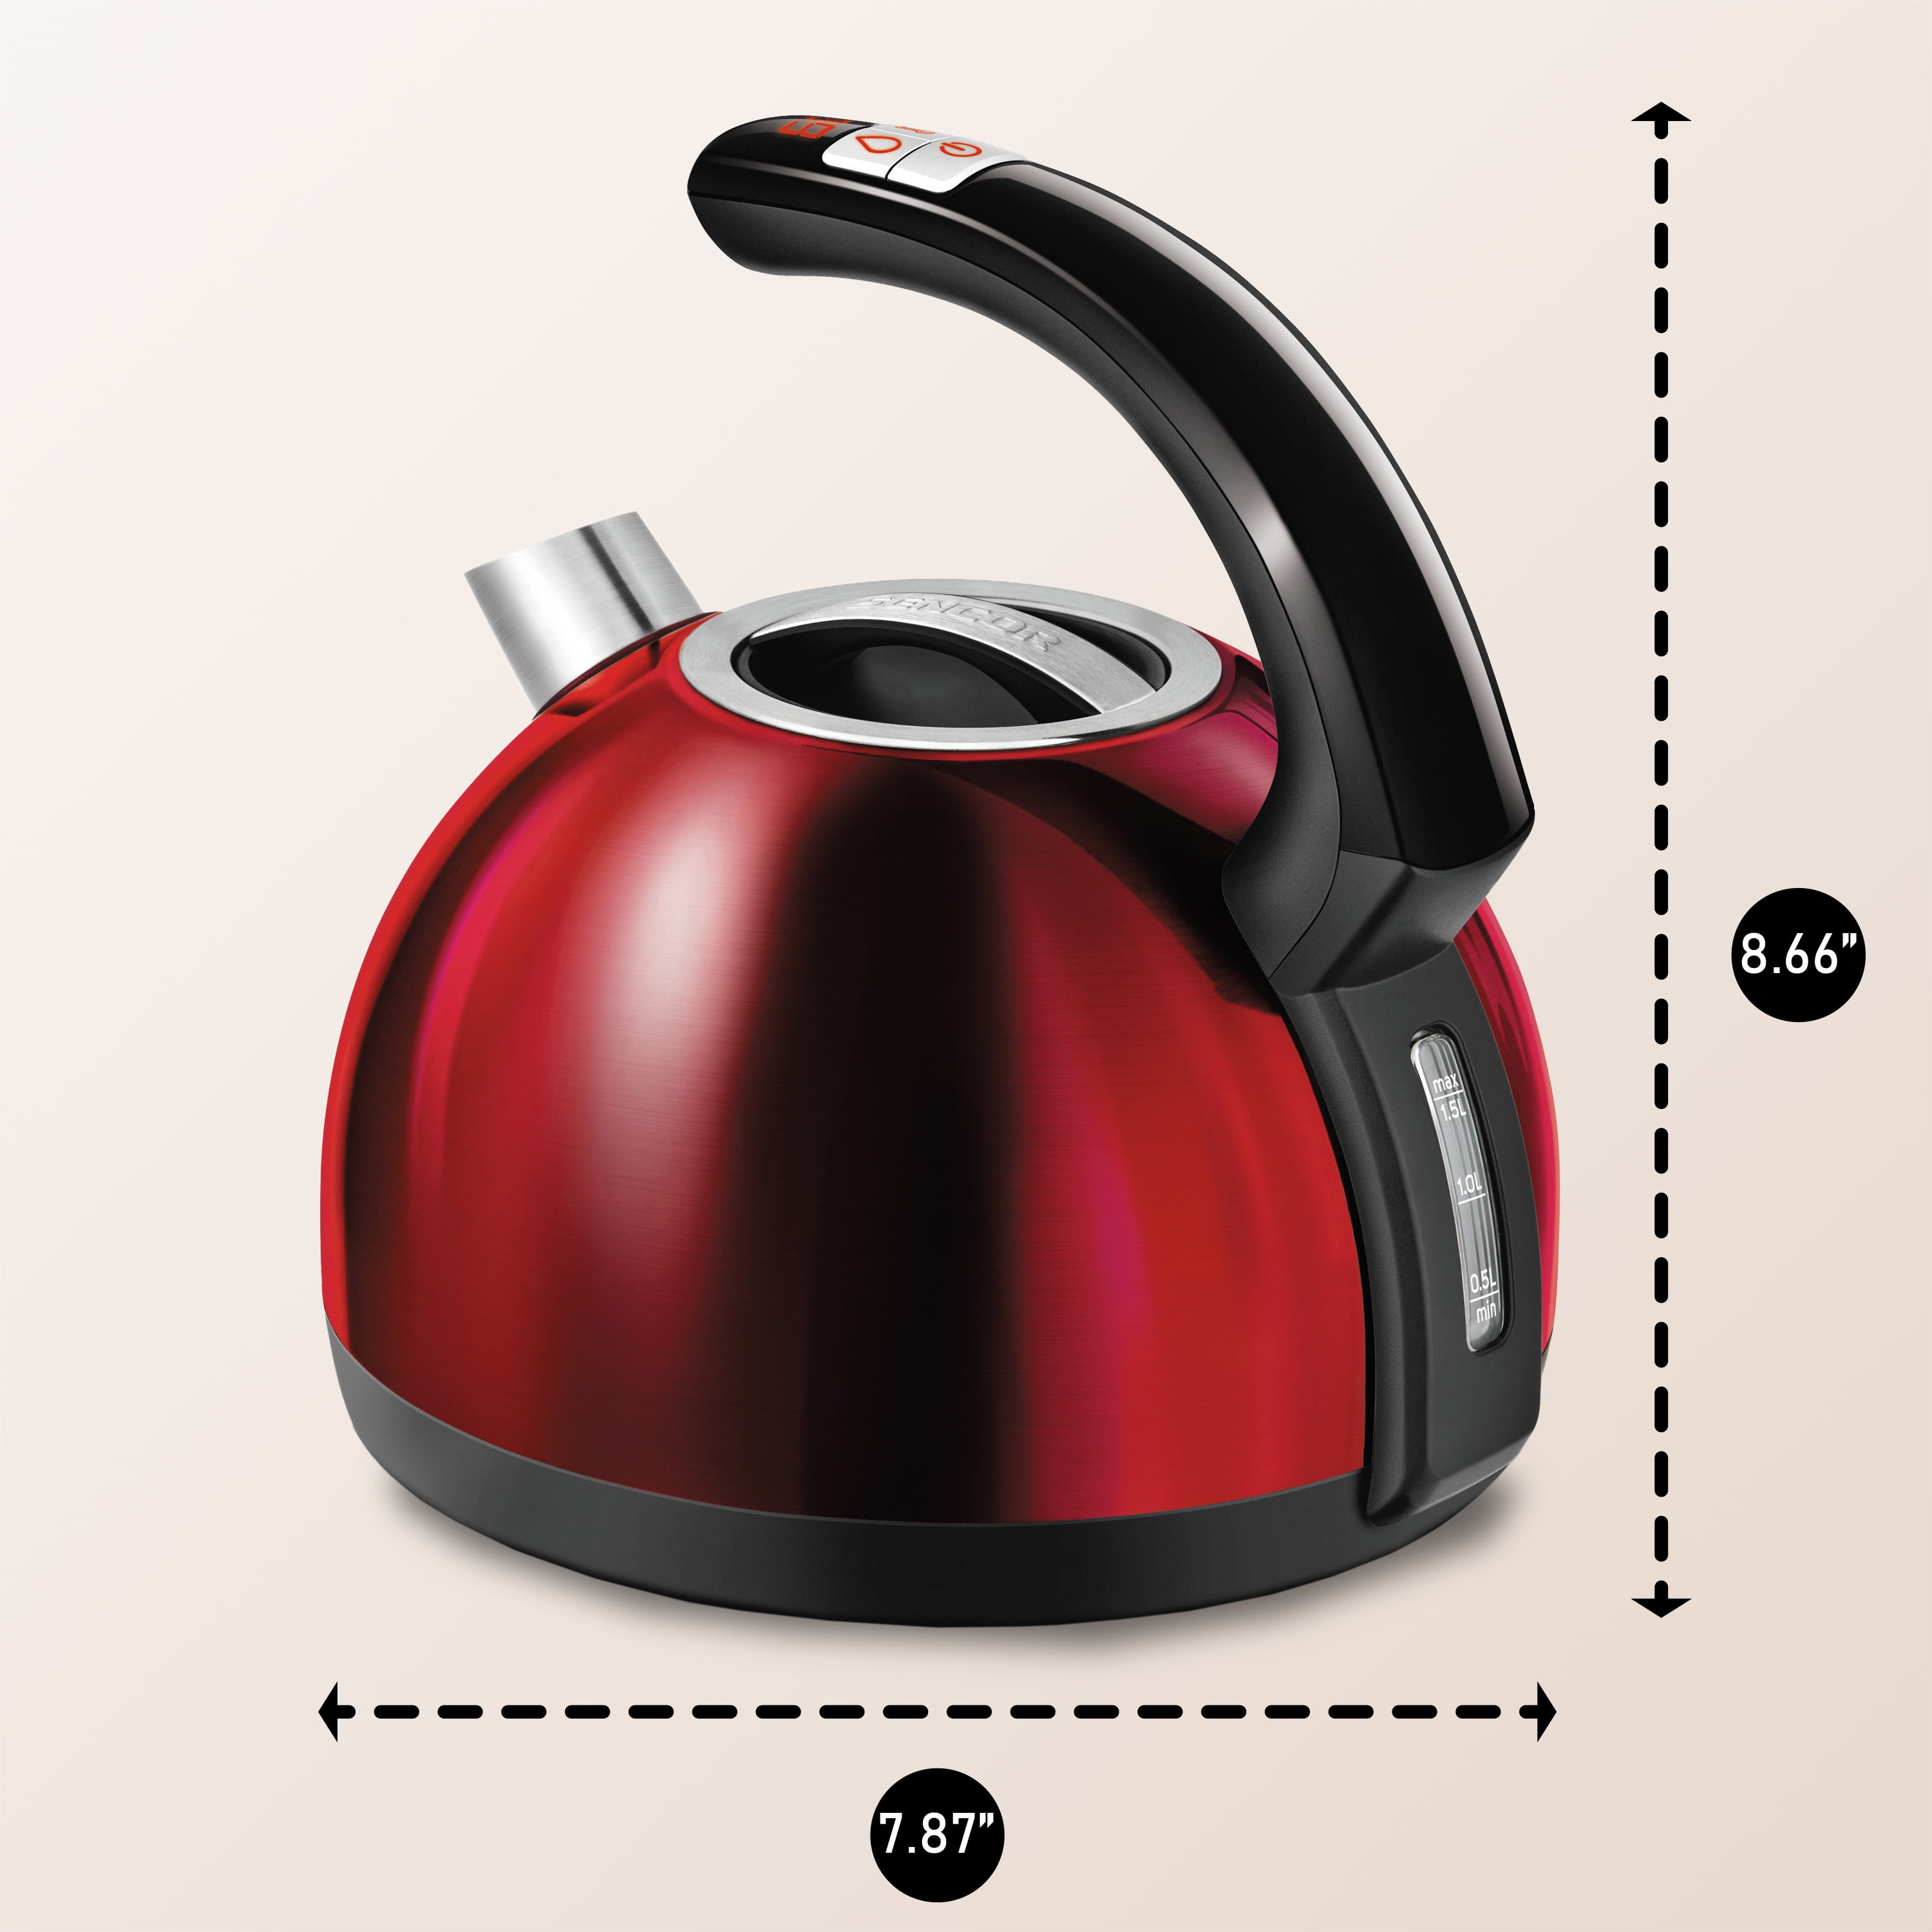 Sencor SWK1573CO Electric Kettle with Display and Power Cord Base